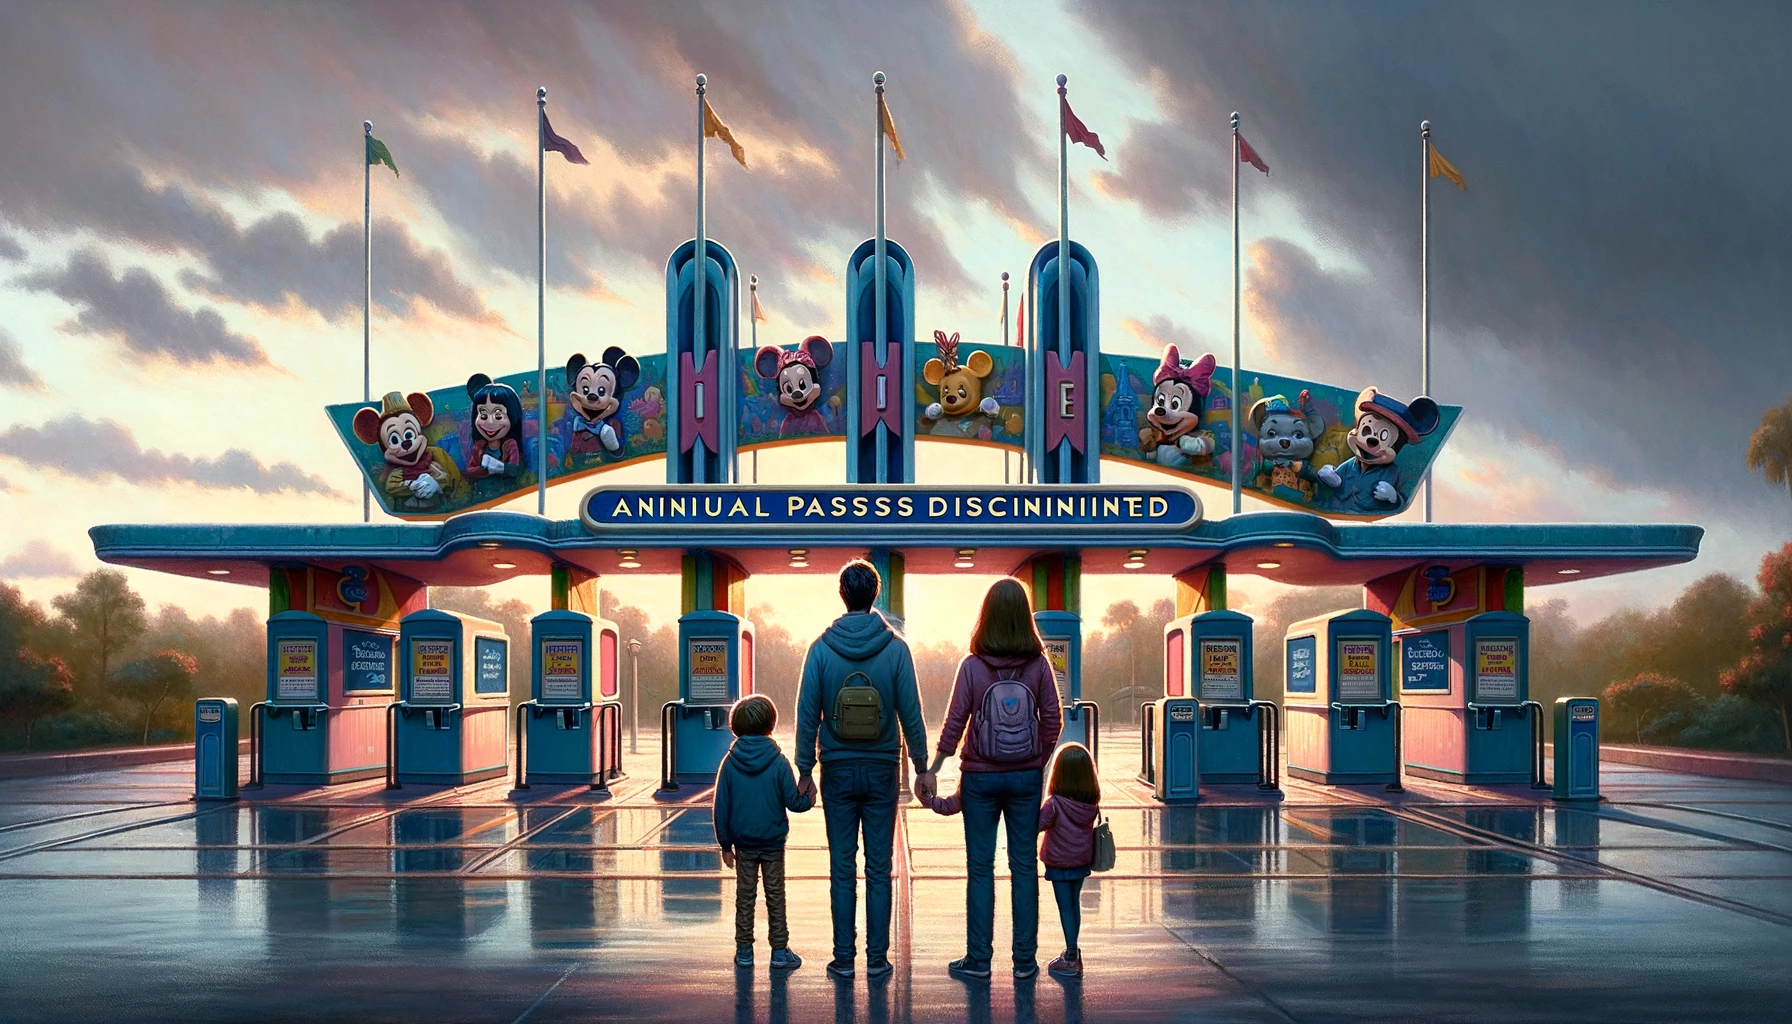 A poignant scene at a Disney theme park entrance, illustrating the discontinuation of annual passes. The image shows a large, colorful entrance gate adorned with Disney characters looking somber. A family of four (mom, dad, a boy, and a girl), all wearing Disney-themed attire, stands in front of the gate, looking disappointed. The sky is overcast, and there are several closed ticket booths with signs reading 'Annual Passes Discontinued'. Emphasize a mood of nostalgia and loss, with an empty park visible in the background.